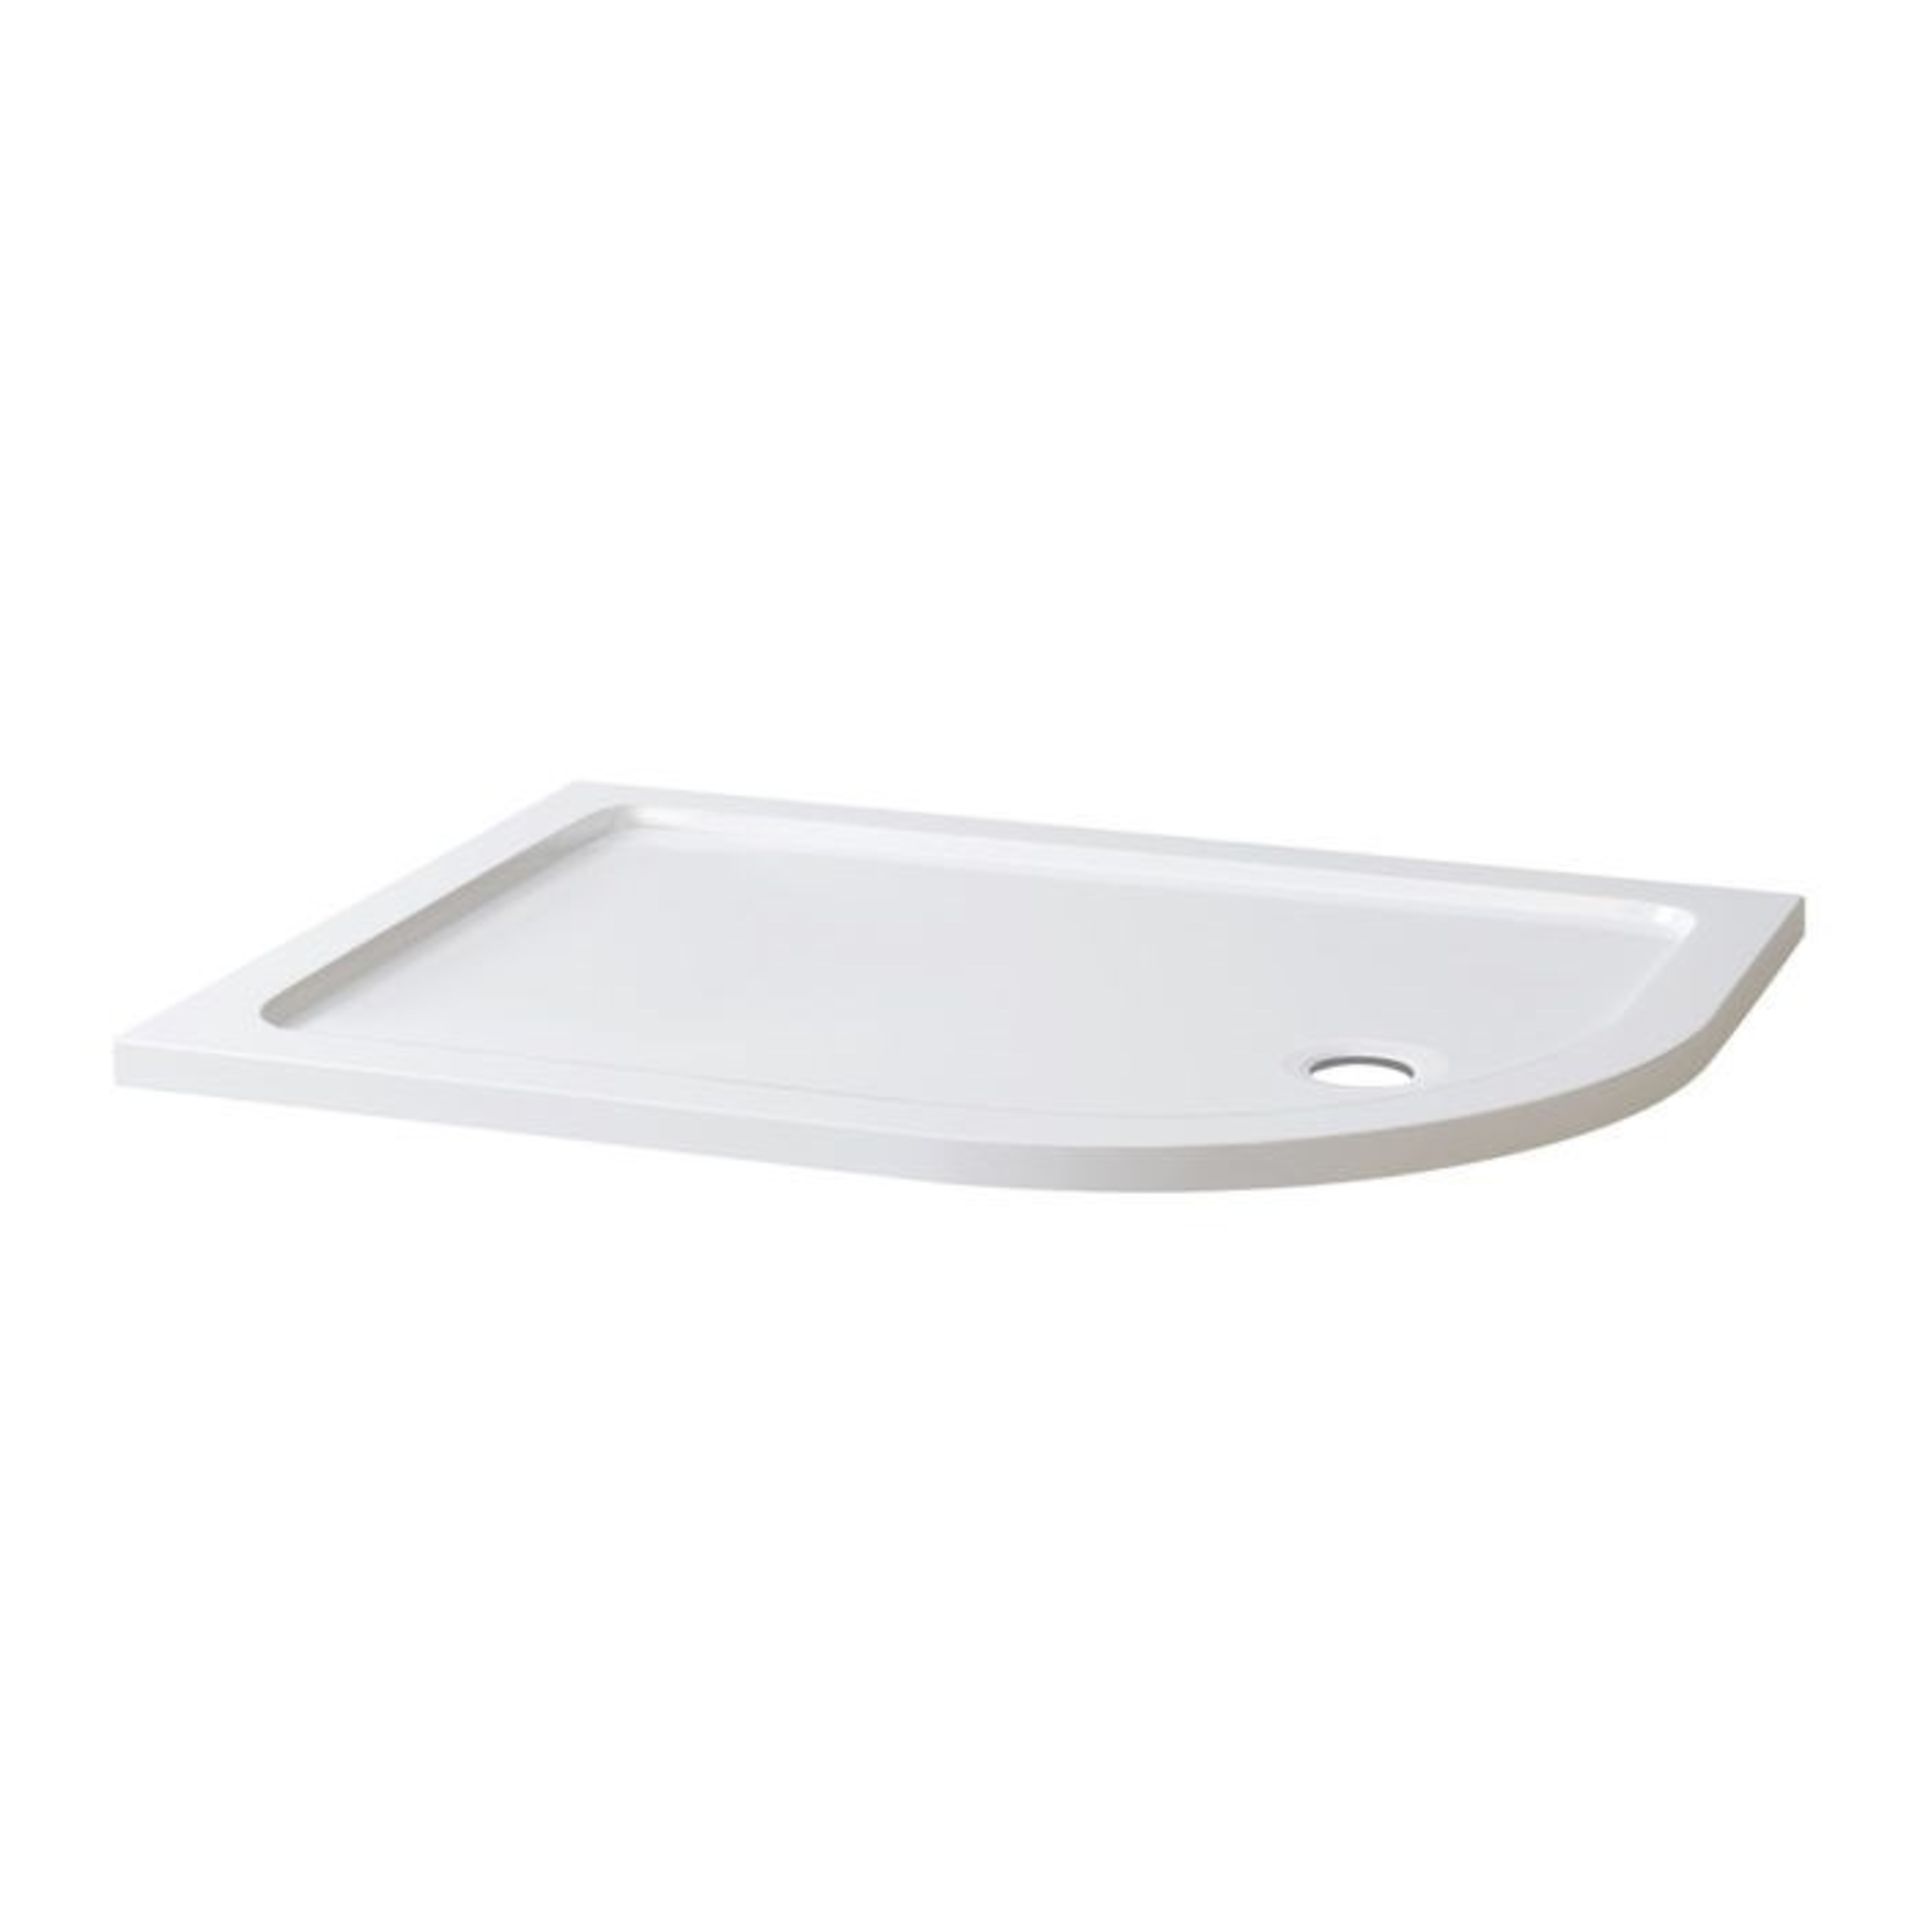 (AD91) 1200x900mm Offset Quadrant Ultra Slim Stone Shower Tray - Right. Low profile ultra Desi... - Image 2 of 2